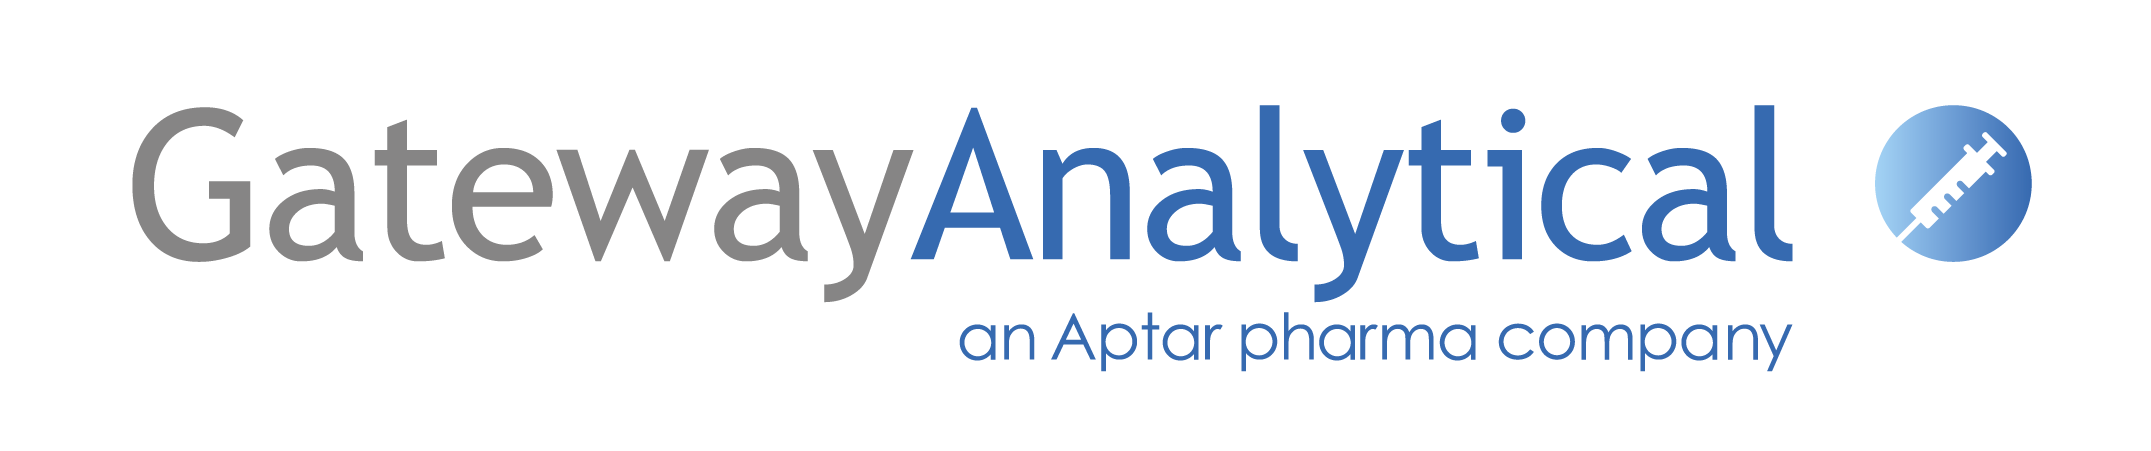 Analysis Solutions